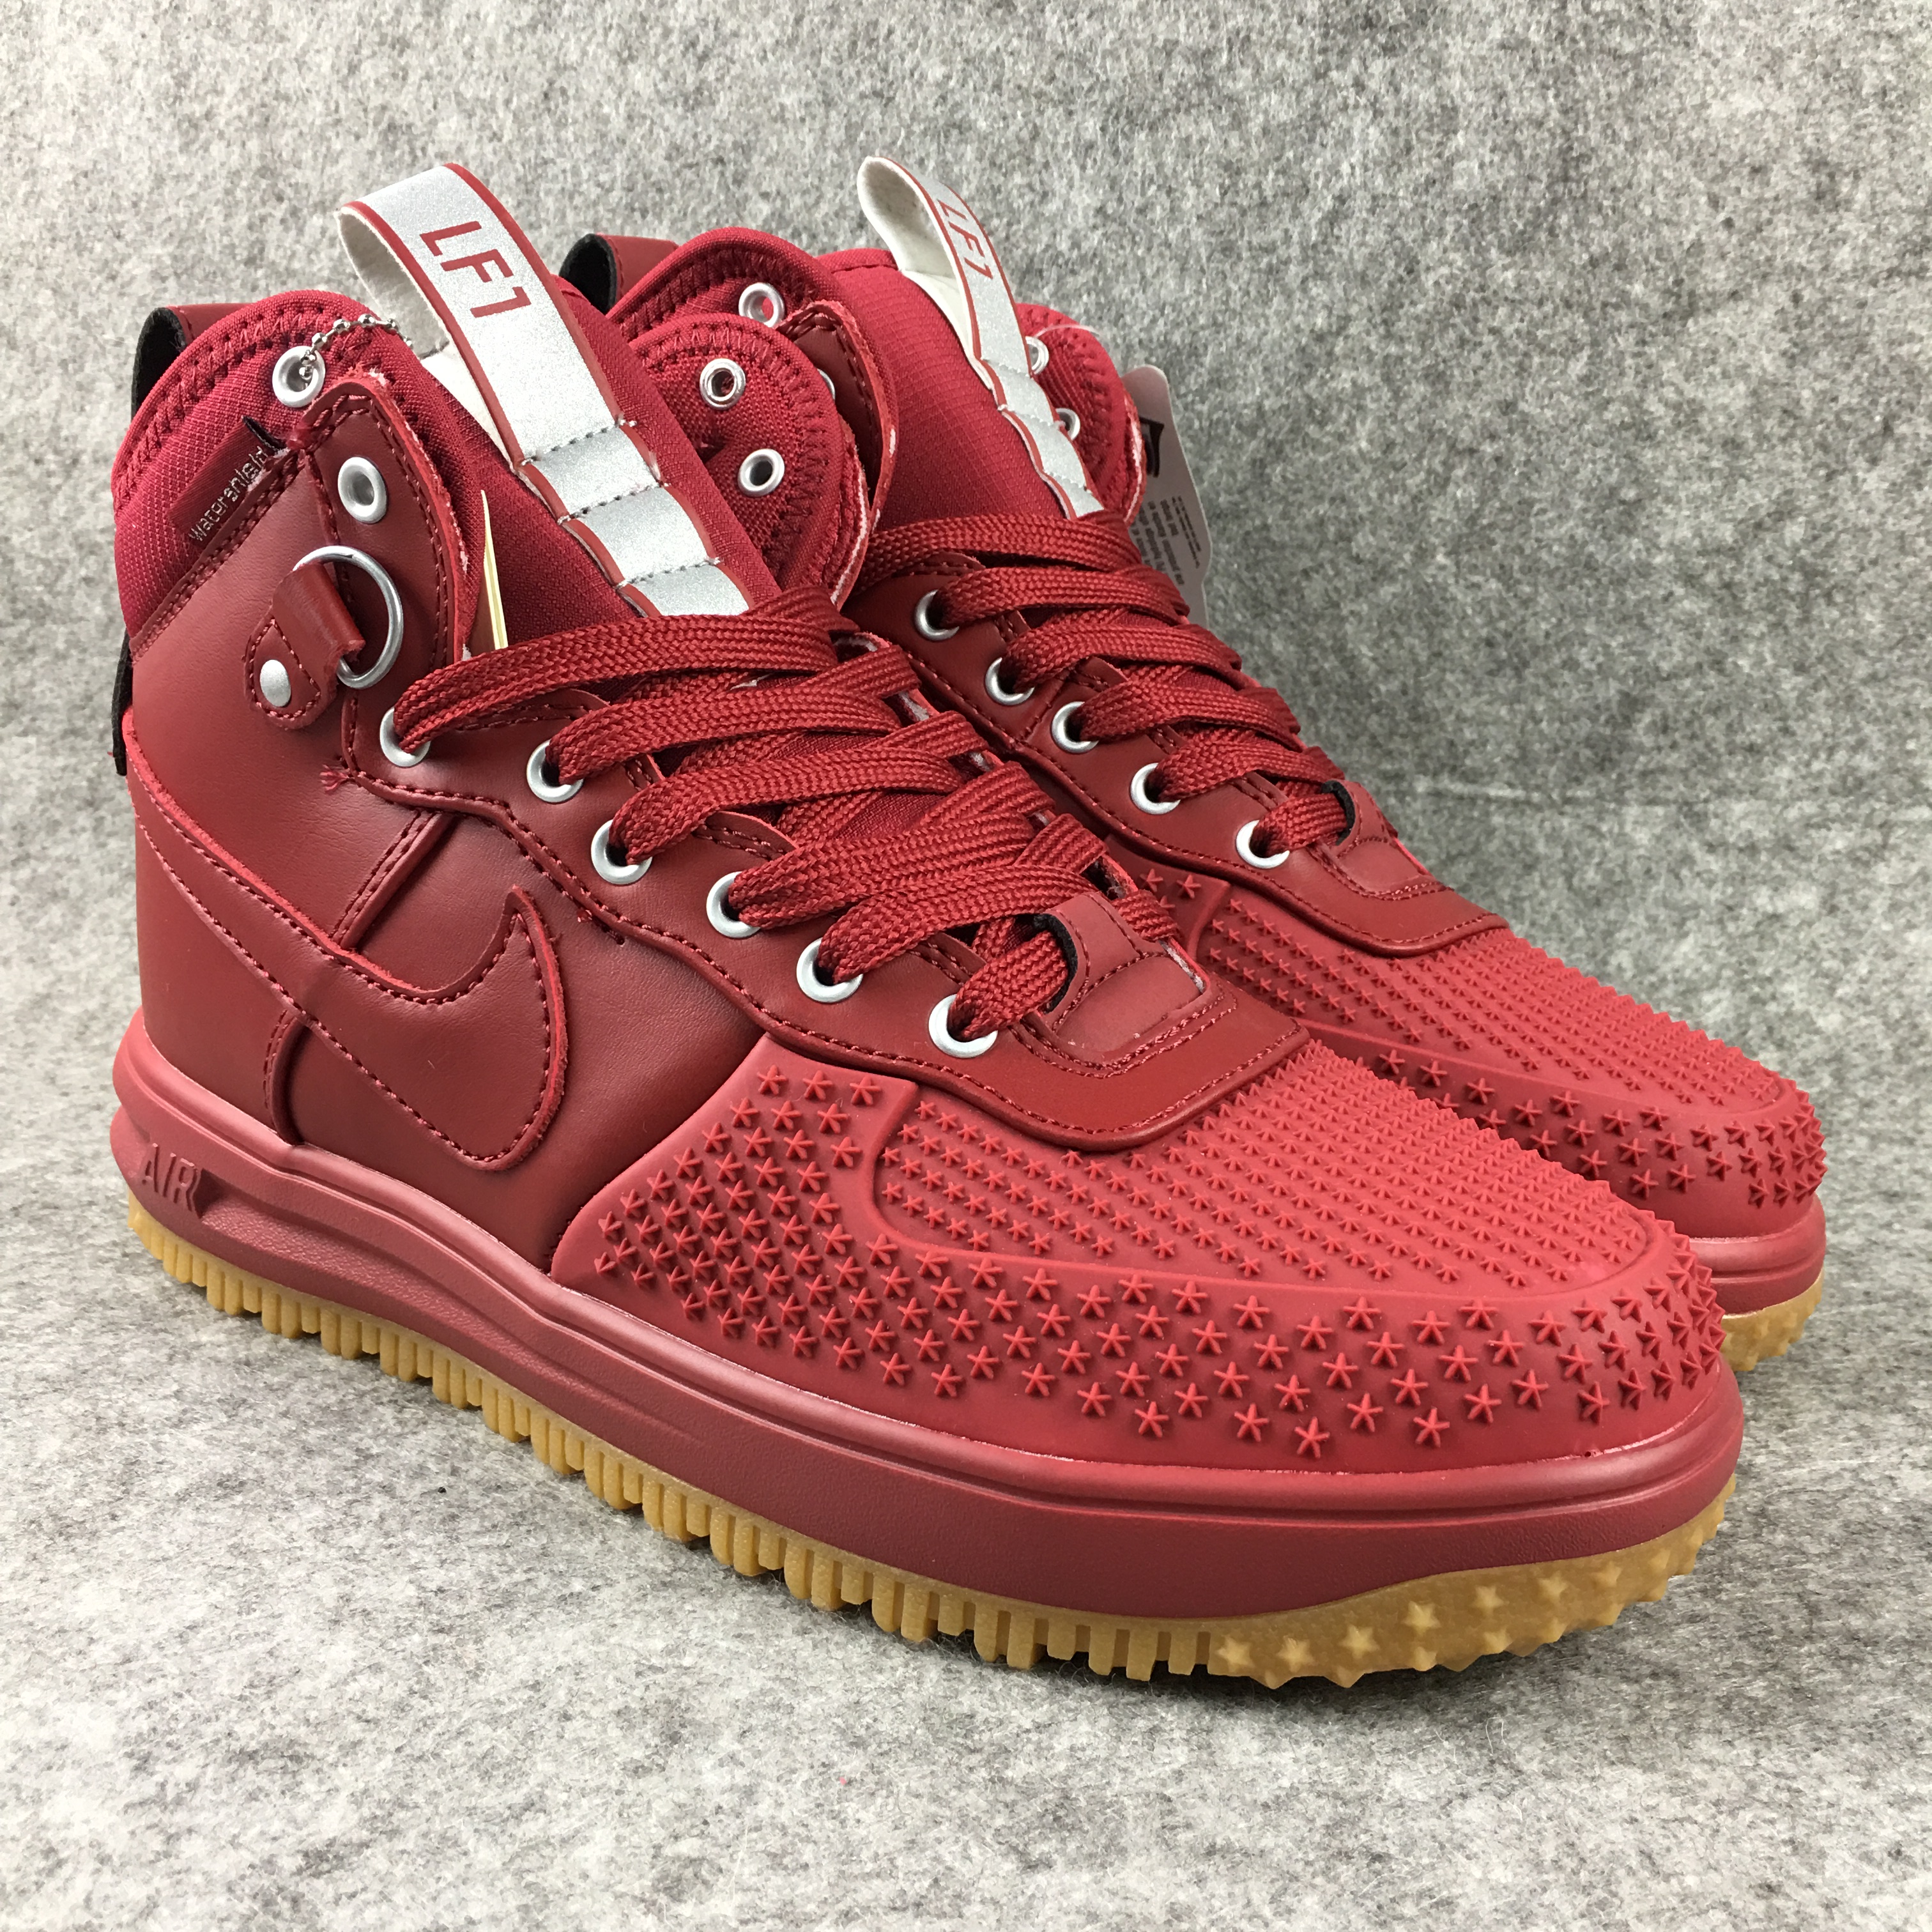 New Nike Lunar Force 1 High All Red Shoes